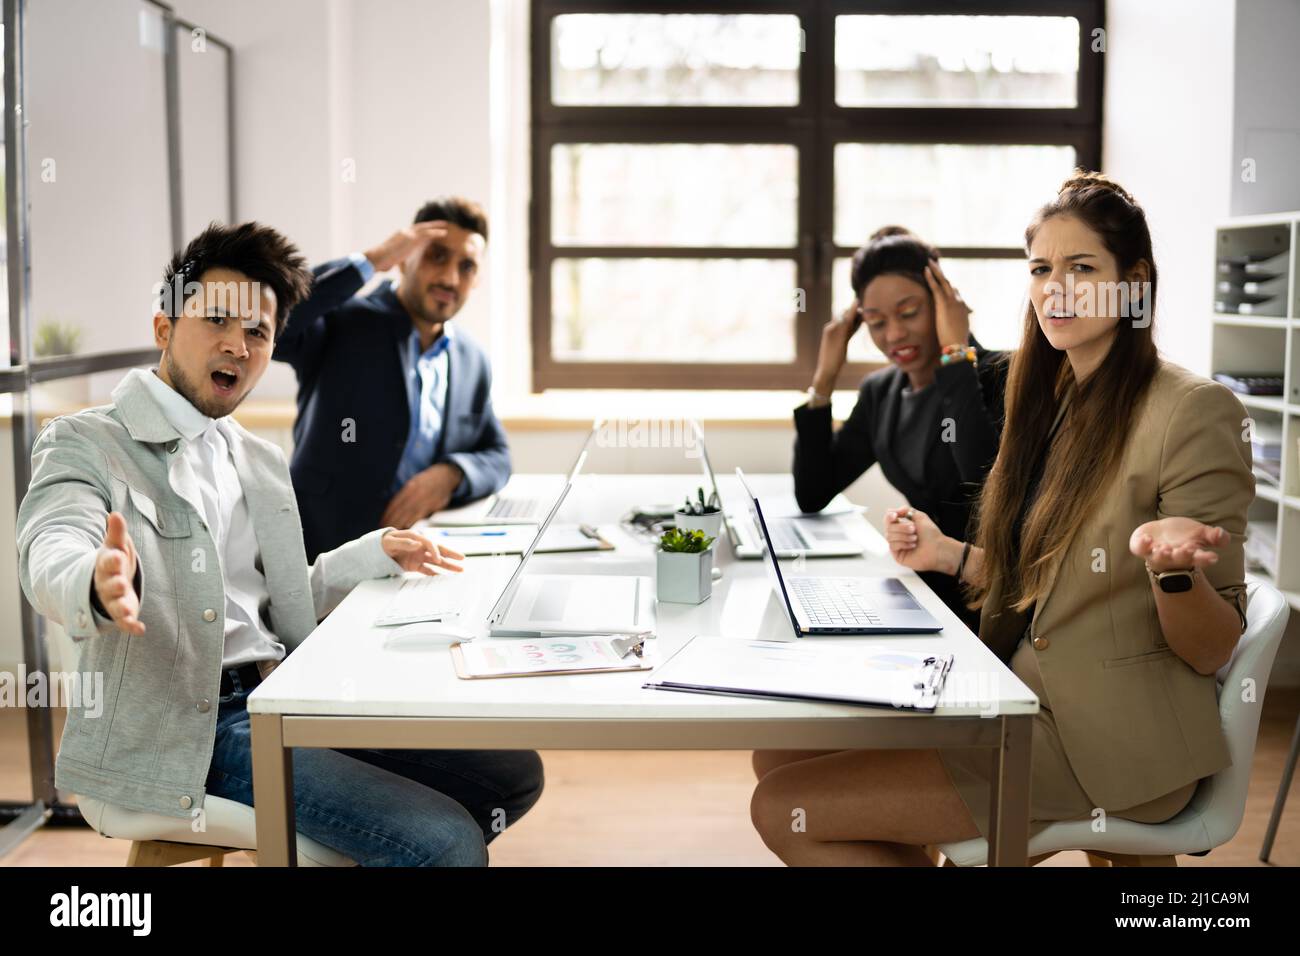 Angry Executives At Workplace Complaining. Worker Fight Stock Photo